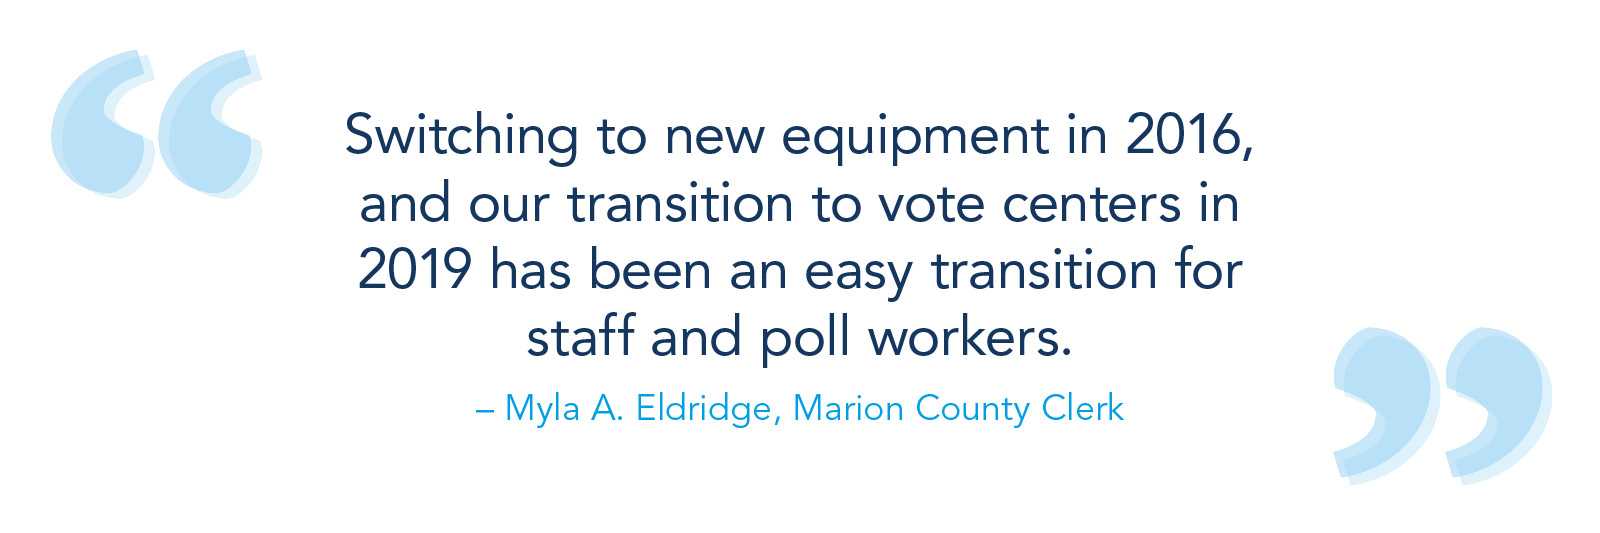 Switching to new equipment in 2016, and our transition to vote centers in 2019 has been an easy transition for staff and poll workers. – Myla A. Eldridge, Marion County clerk